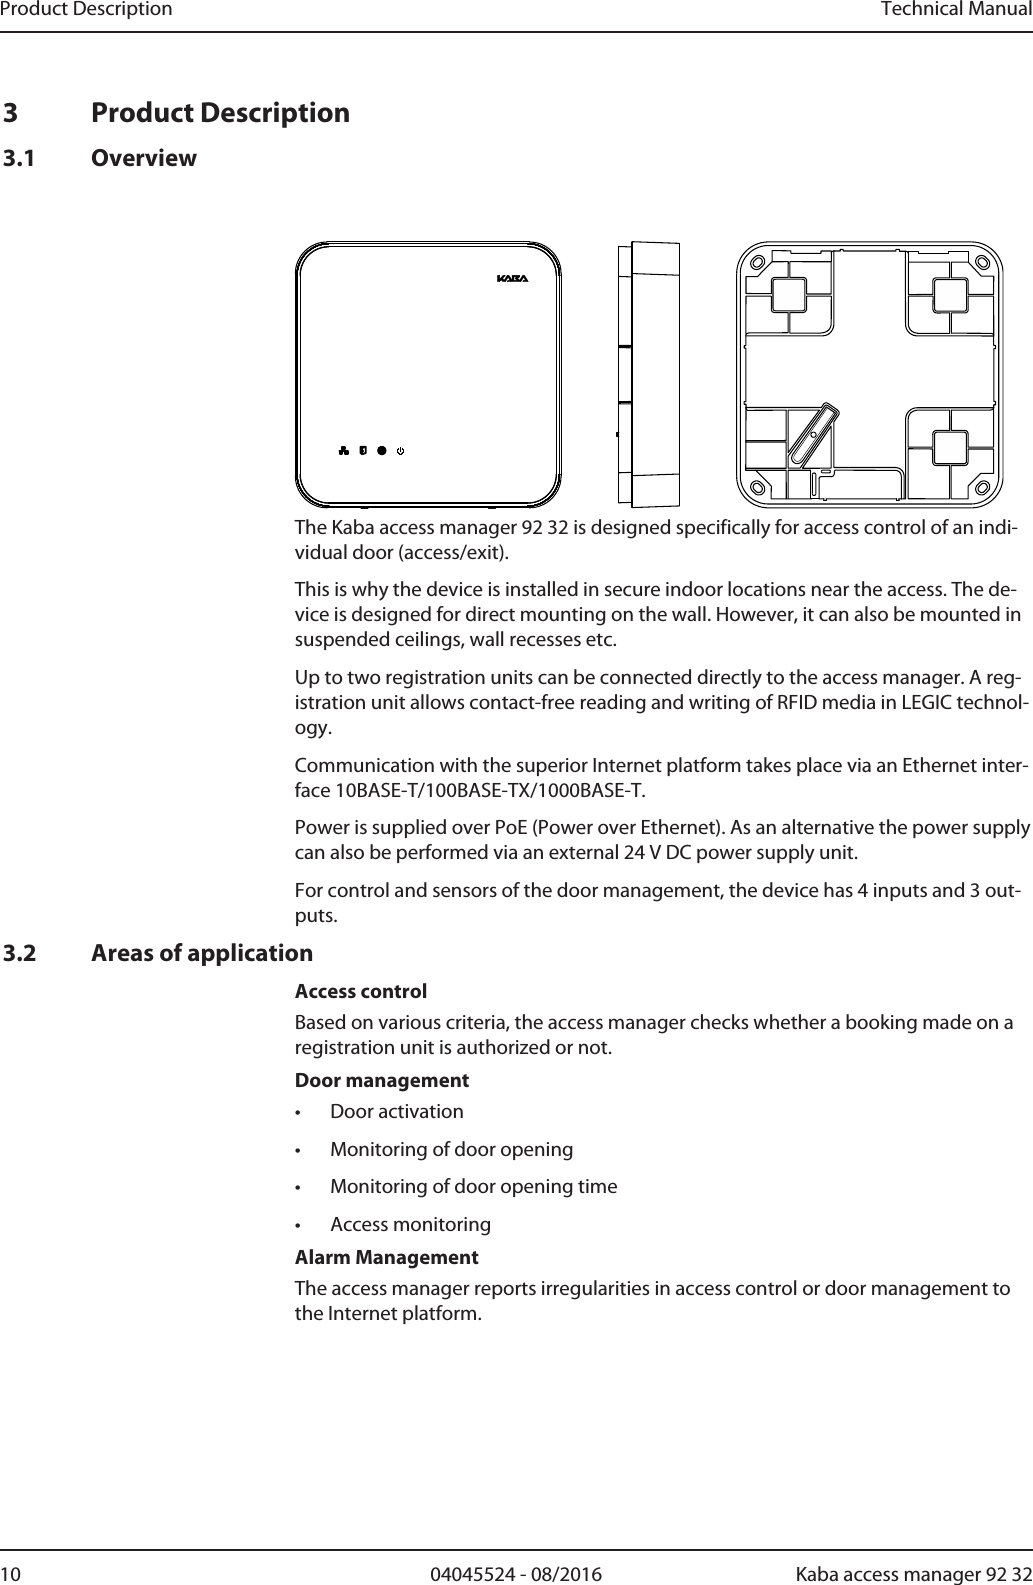 Product Description Technical Manual10 04045524 - 08/2016 Kaba access manager 92 323 Product Description3.1 OverviewThe Kaba access manager 92 32 is designed specifically for access control of an indi-vidual door (access/exit).This is why the device is installed in secure indoor locations near the access. The de-vice is designed for direct mounting on the wall. However, it can also be mounted insuspended ceilings, wall recesses etc.Up to two registration units can be connected directly to the access manager. A reg-istration unit allows contact-free reading and writing of RFID media in LEGIC technol-ogy.Communication with the superior Internet platform takes place via an Ethernet inter-face 10BASE-T/100BASE-TX/1000BASE-T.Power is supplied over PoE (Power over Ethernet). As an alternative the power supplycan also be performed via an external 24 V DC power supply unit.For control and sensors of the door management, the device has 4 inputs and 3 out-puts.3.2 Areas of applicationAccess controlBased on various criteria, the access manager checks whether a booking made on aregistration unit is authorized or not.Door management• Door activation• Monitoring of door opening• Monitoring of door opening time• Access monitoringAlarm ManagementThe access manager reports irregularities in access control or door management tothe Internet platform.